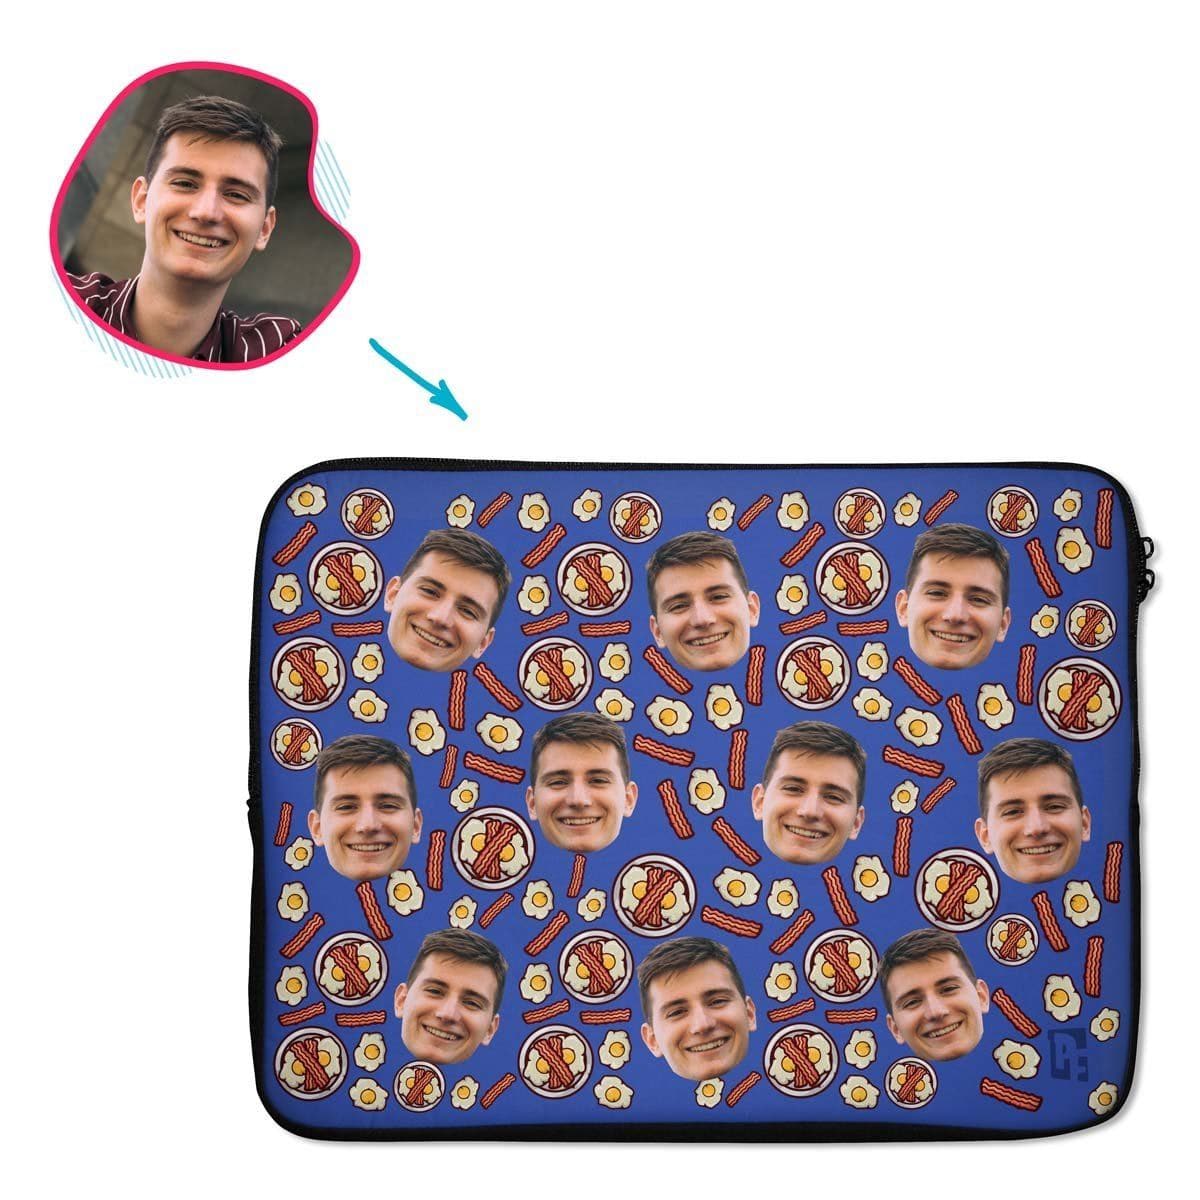 darkblue Bacon and Eggs laptop sleeve personalized with photo of face printed on them